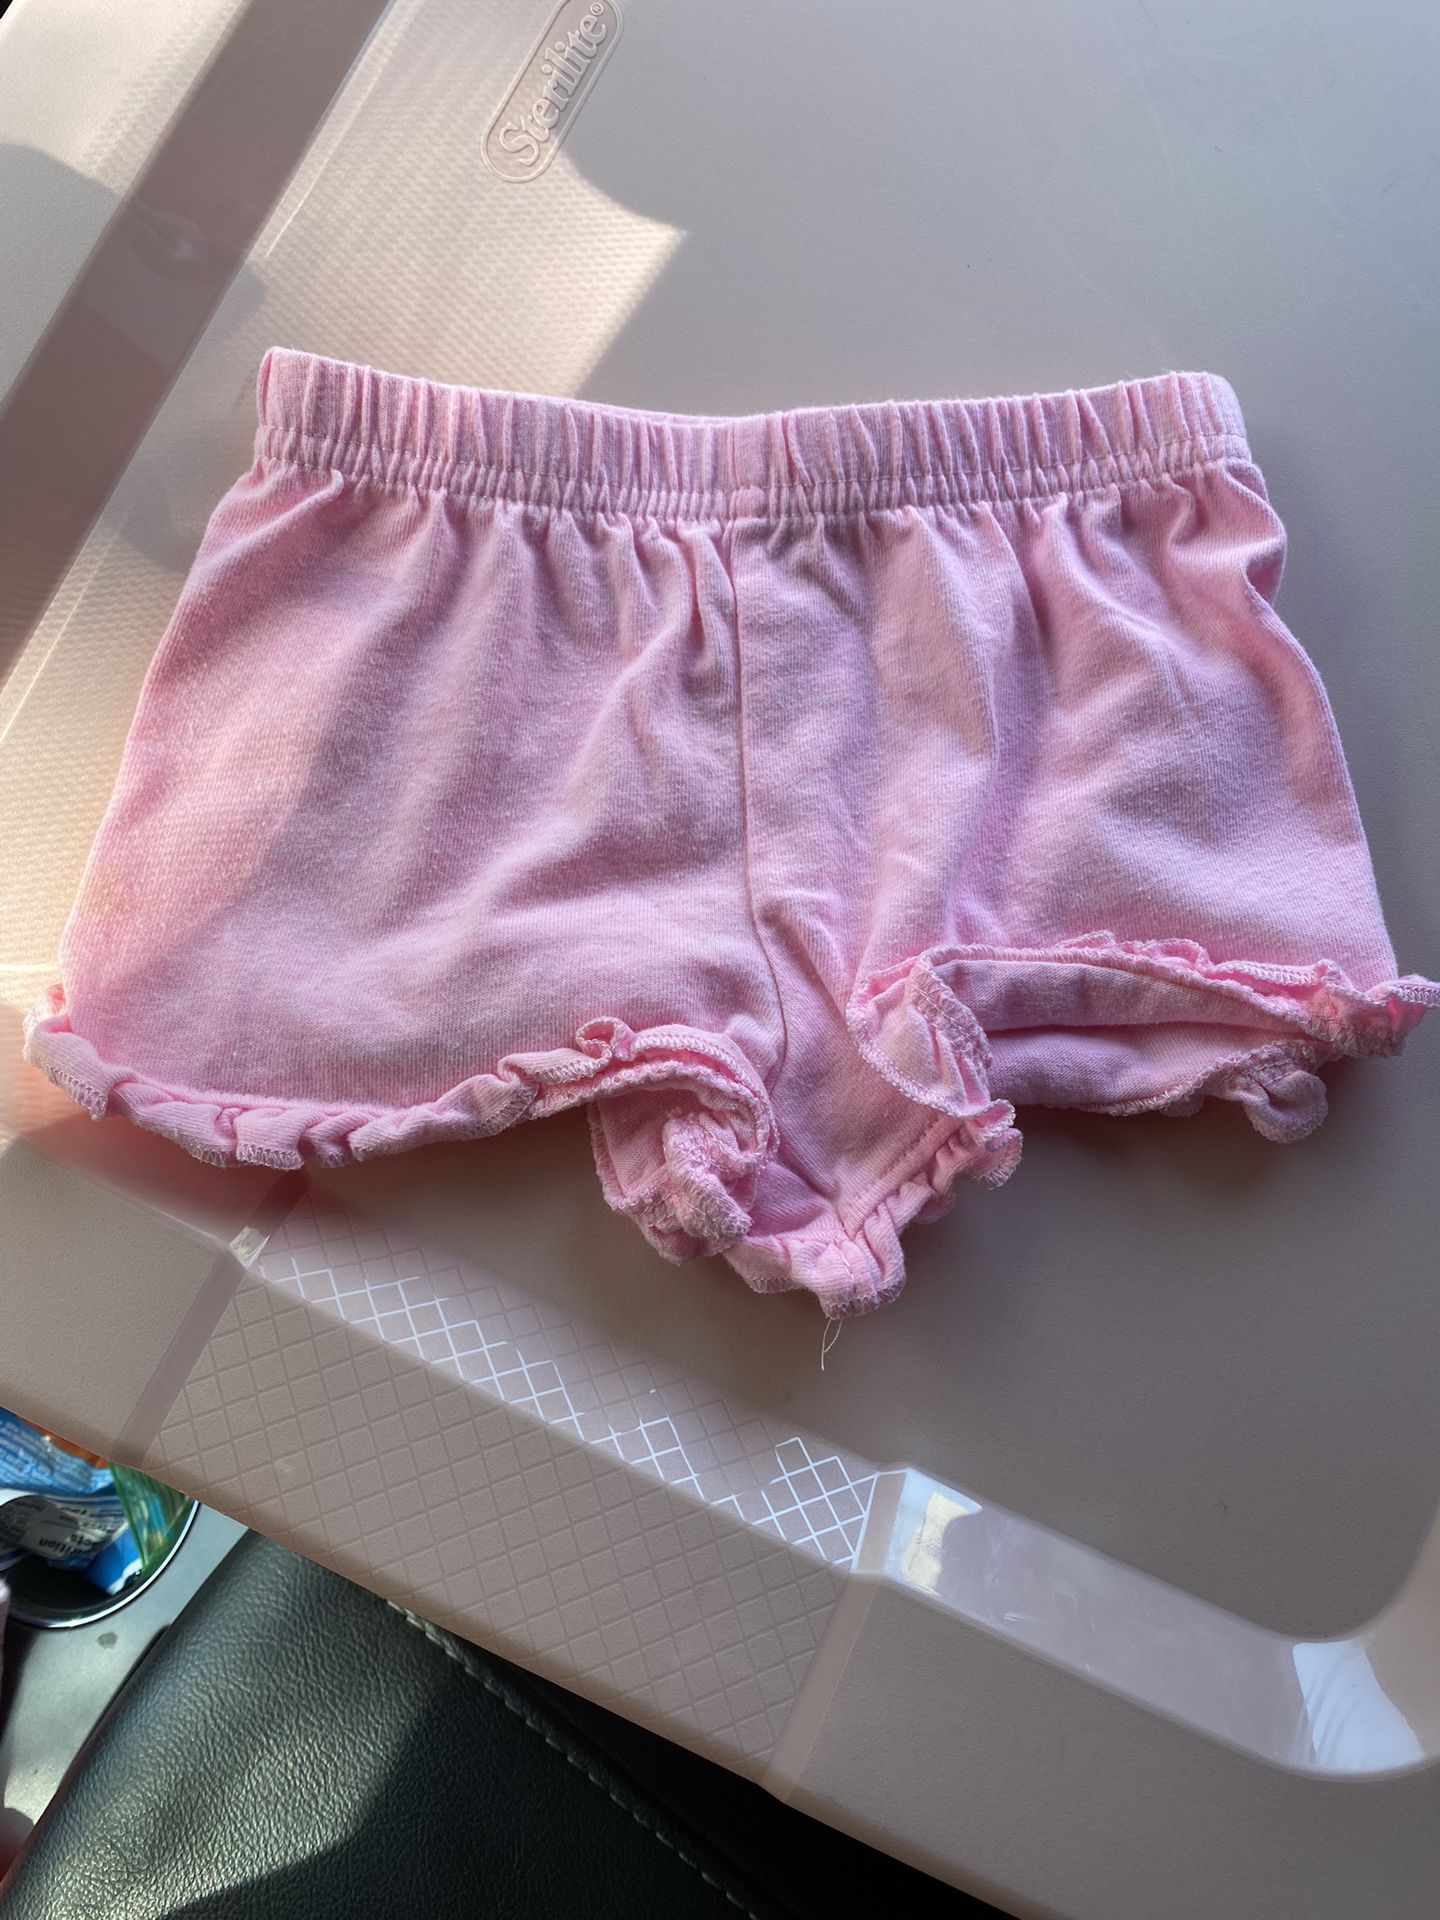 Baby girl shorts - 6-9 Months